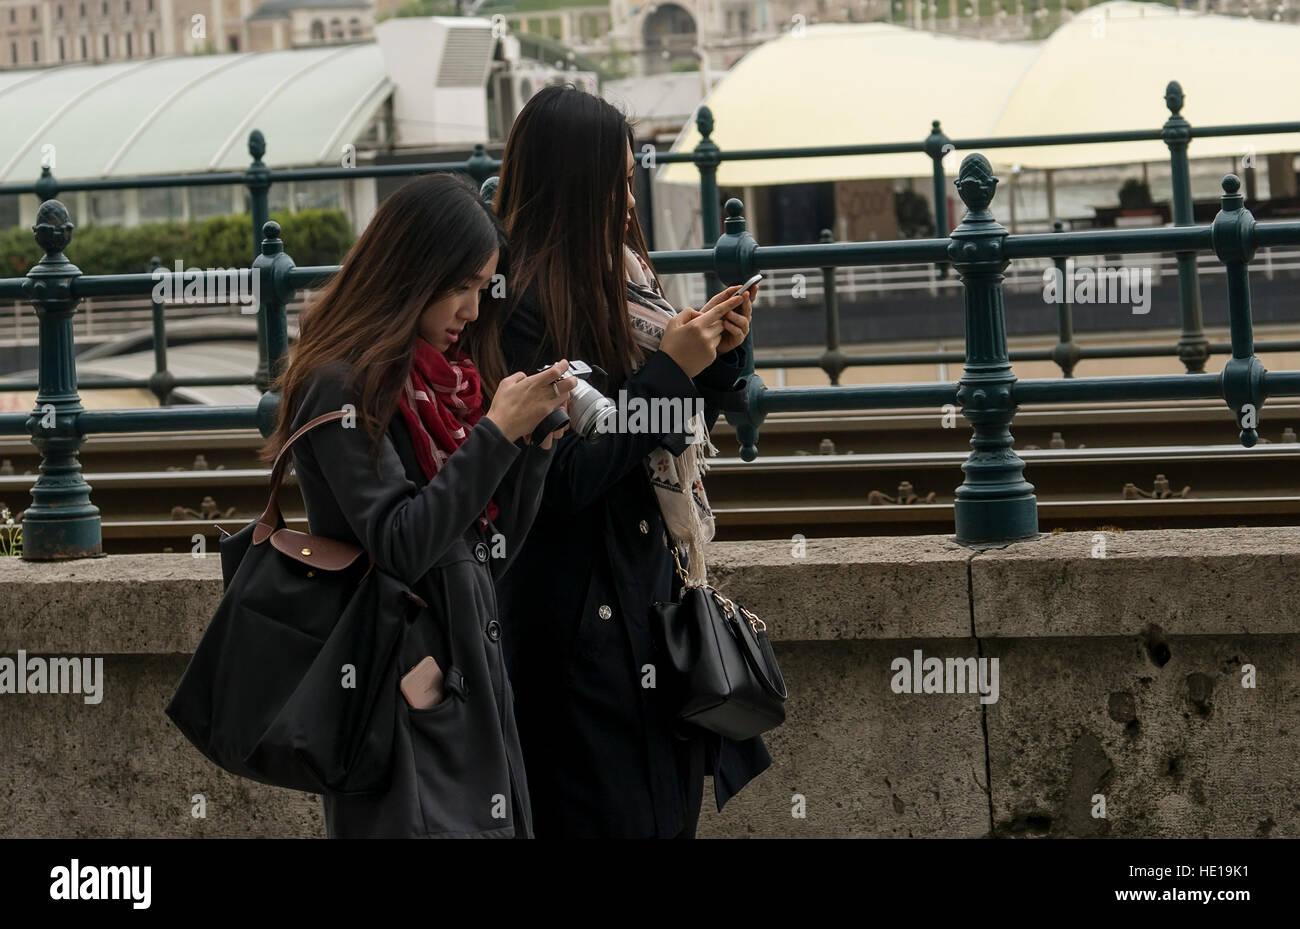 Budapest, Hungary - April 11,2016: Two young Chinese girl walking by the fence and play with mobile phone. Stock Photo